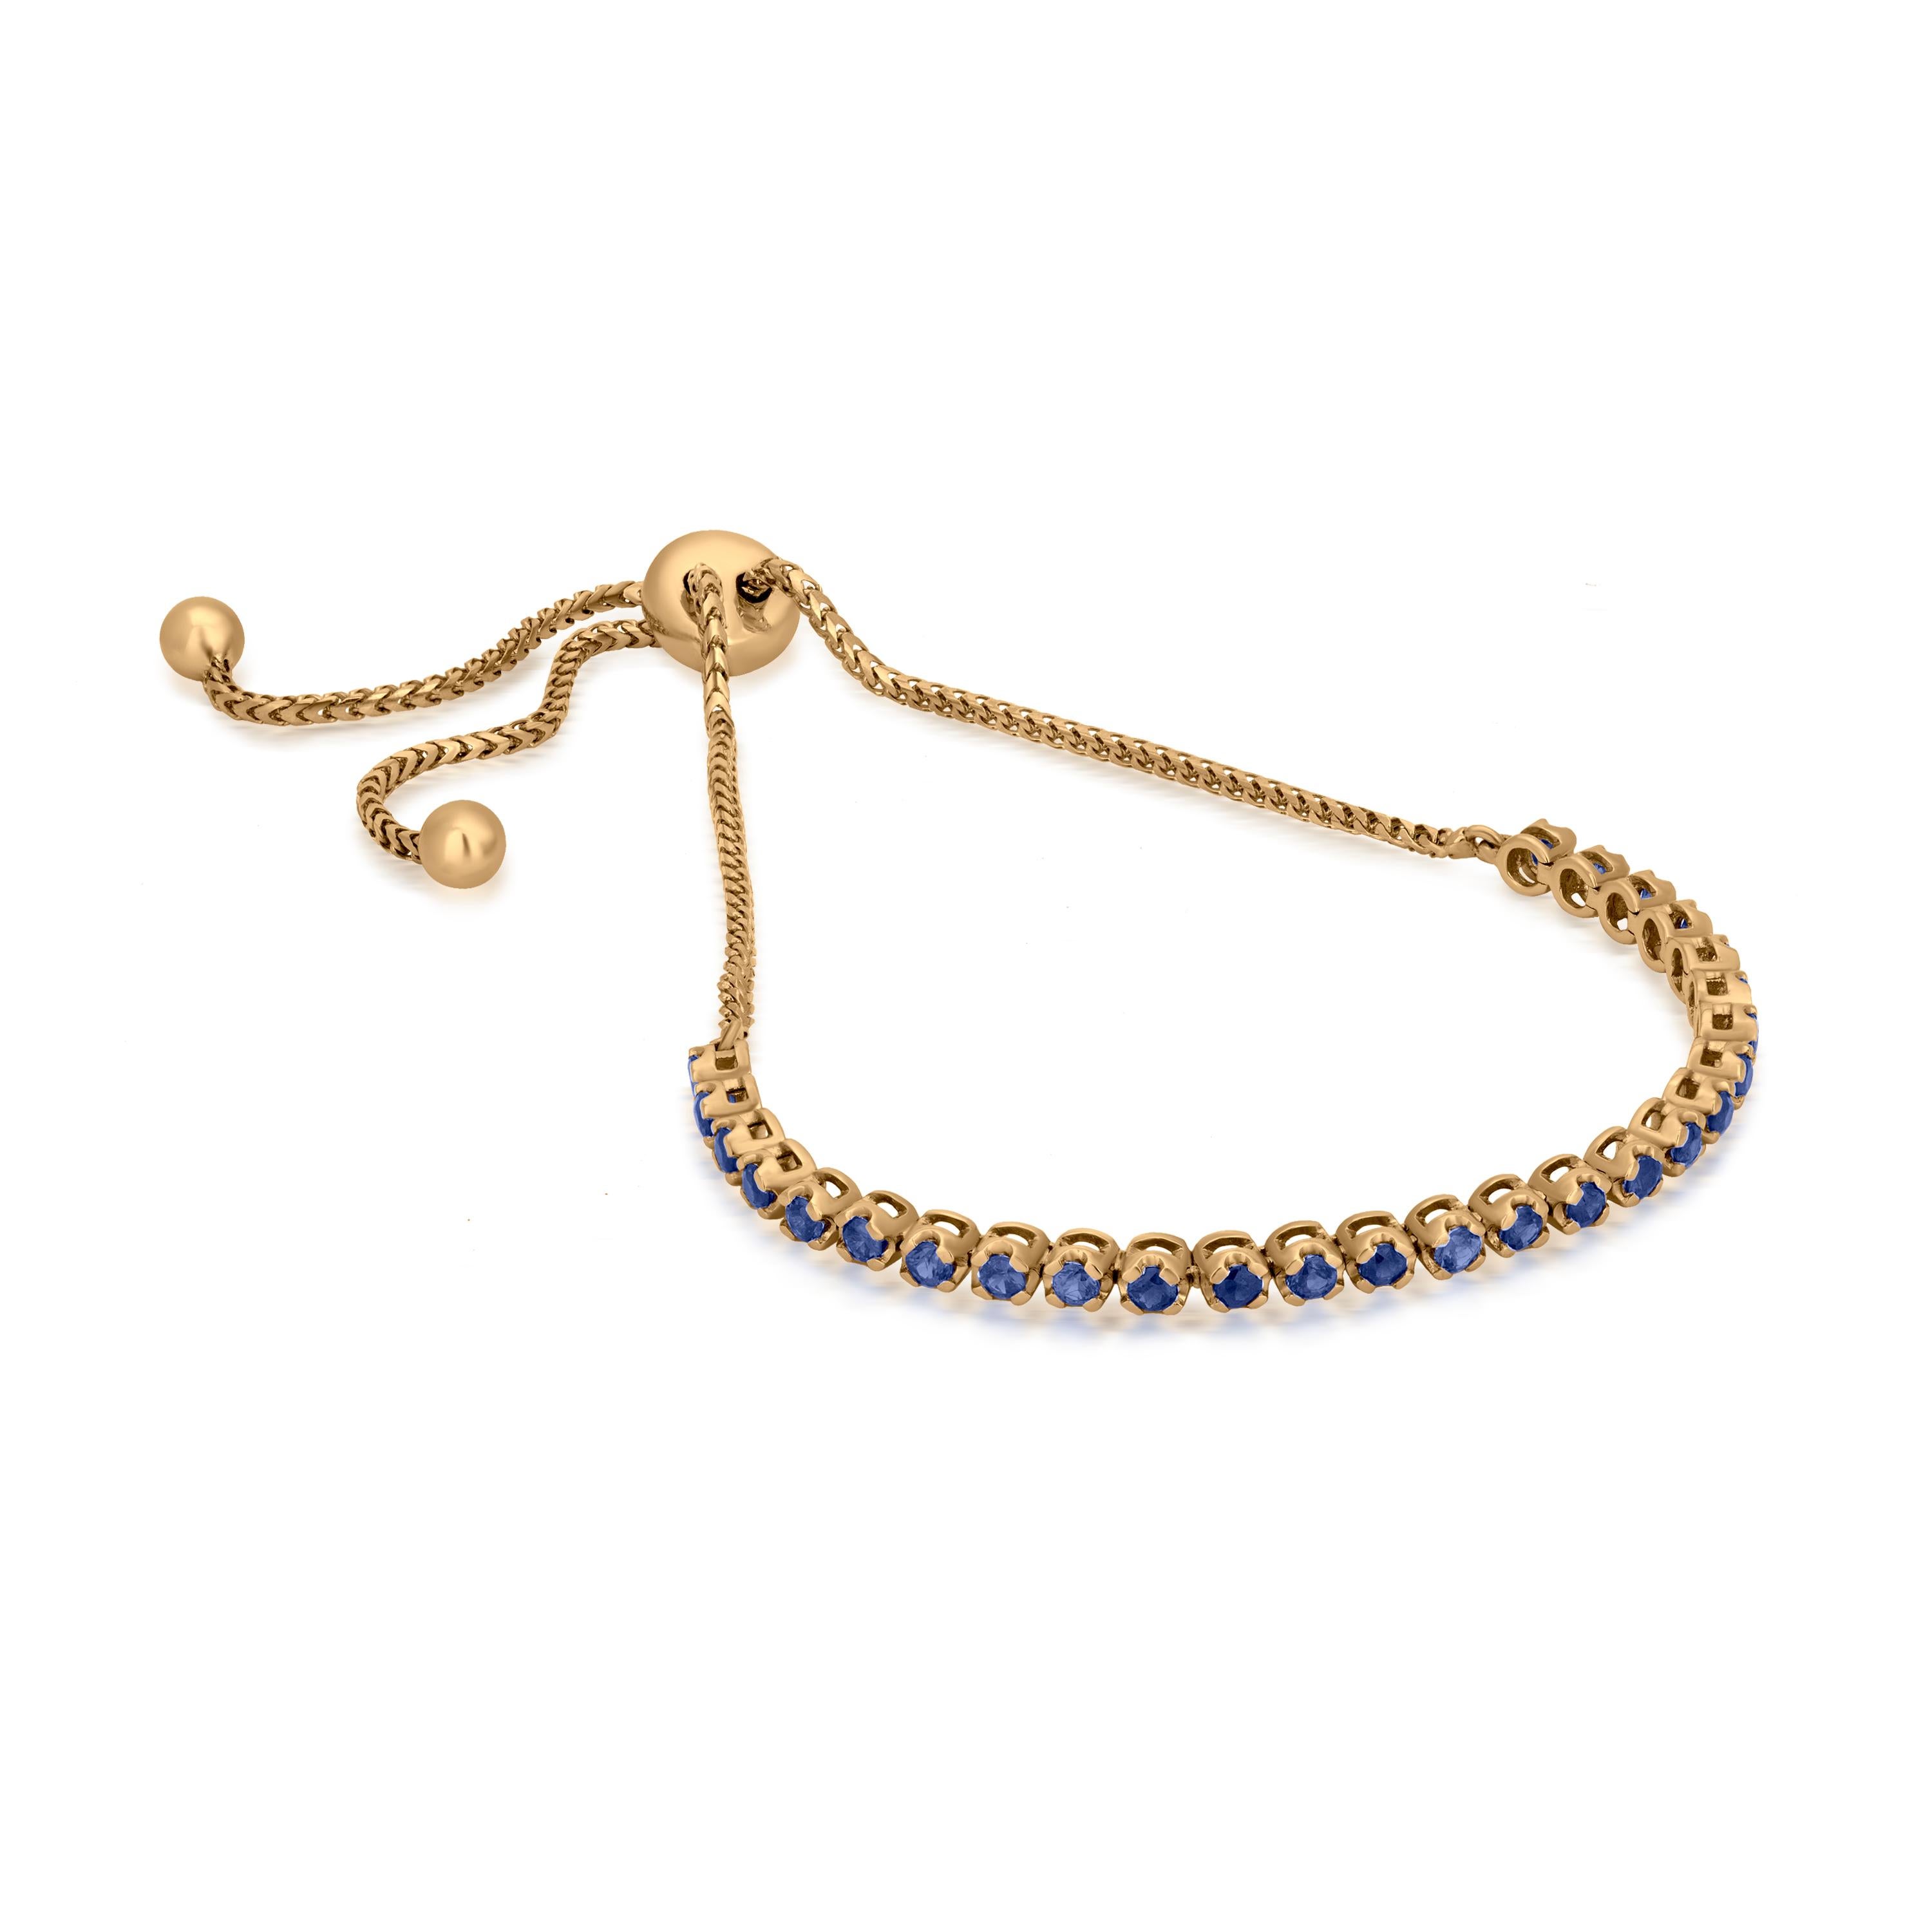 On-trend, this Gemistry tennis bracelet is brilliant. Twenty-Seven blue sapphires totaling 1.19 carats shimmer across the front of a 14k gold box chain. The sliding mechanism adjusts to fit most wrists.

Please follow the Luxury Jewels storefront to